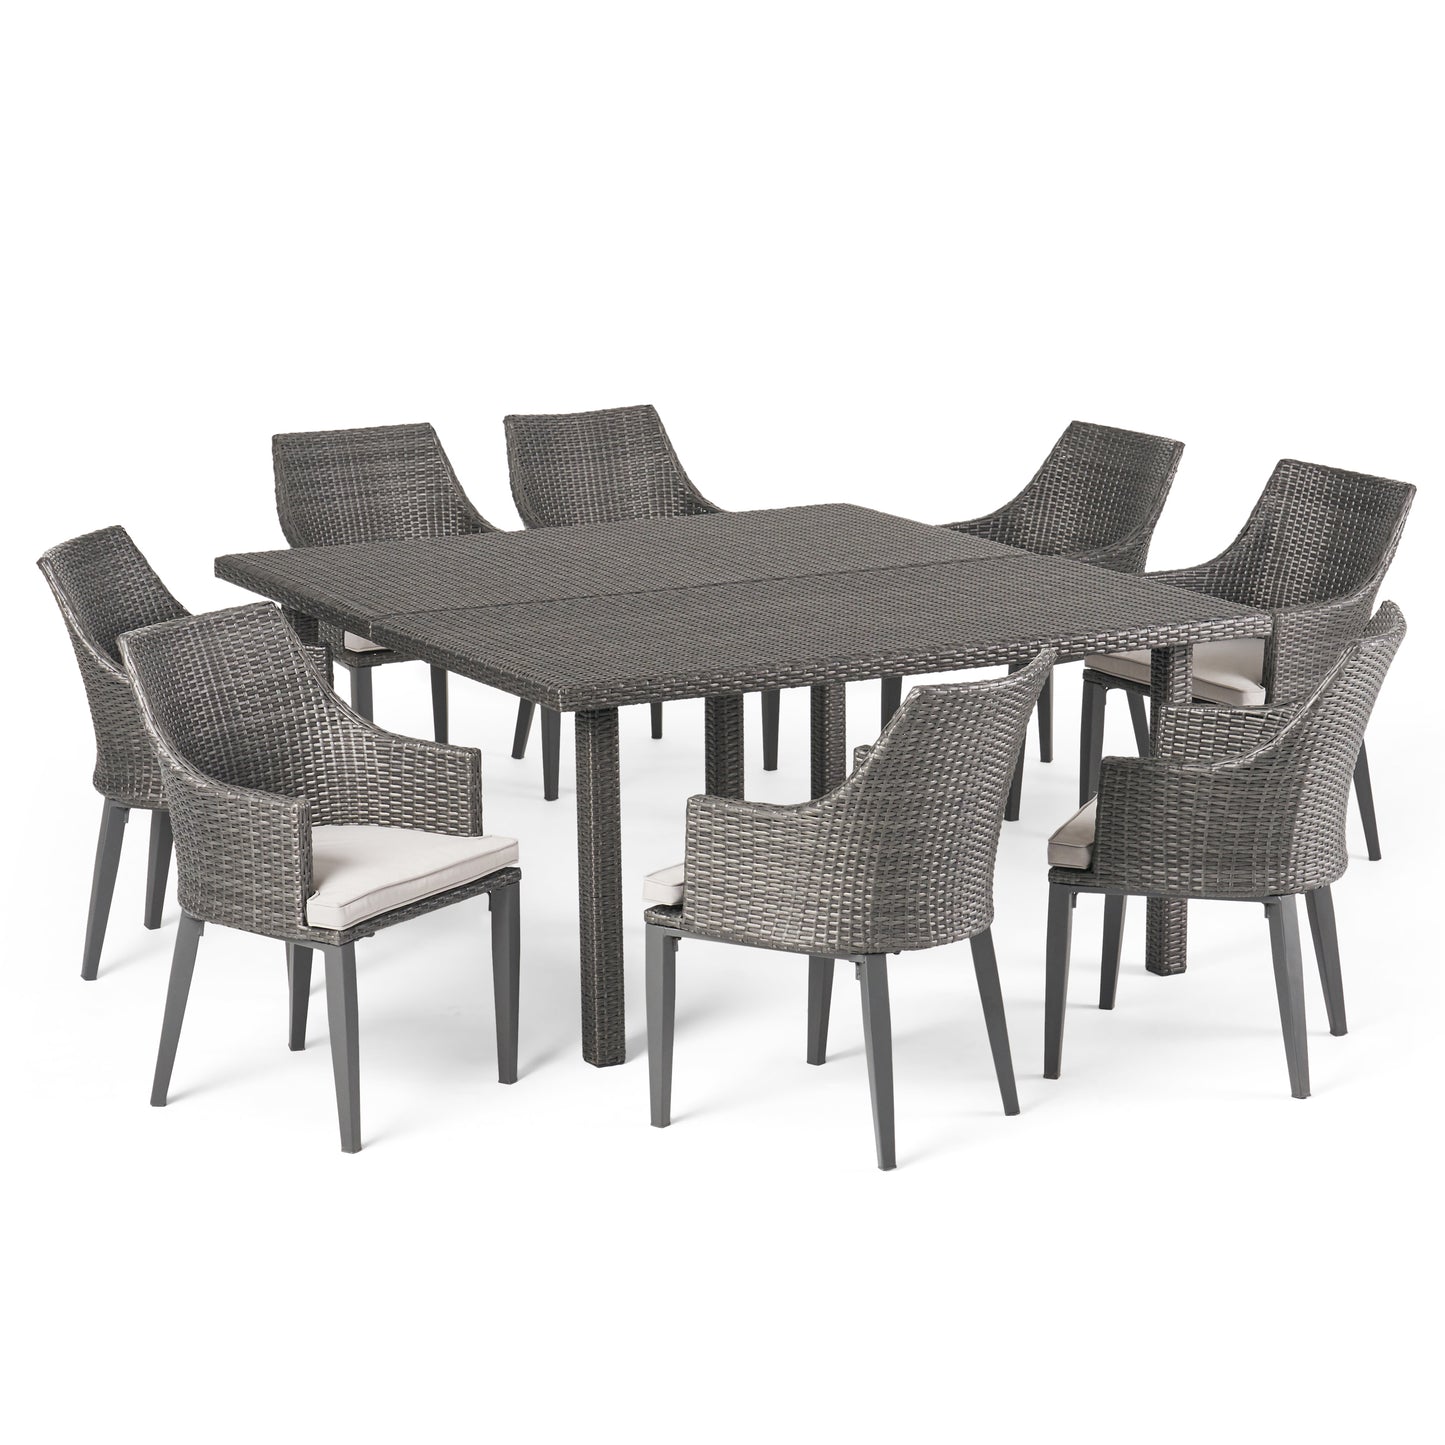 Bheleso Outdoor 9 Piece Wicker Dining Set with Light Water Resistant Cushions